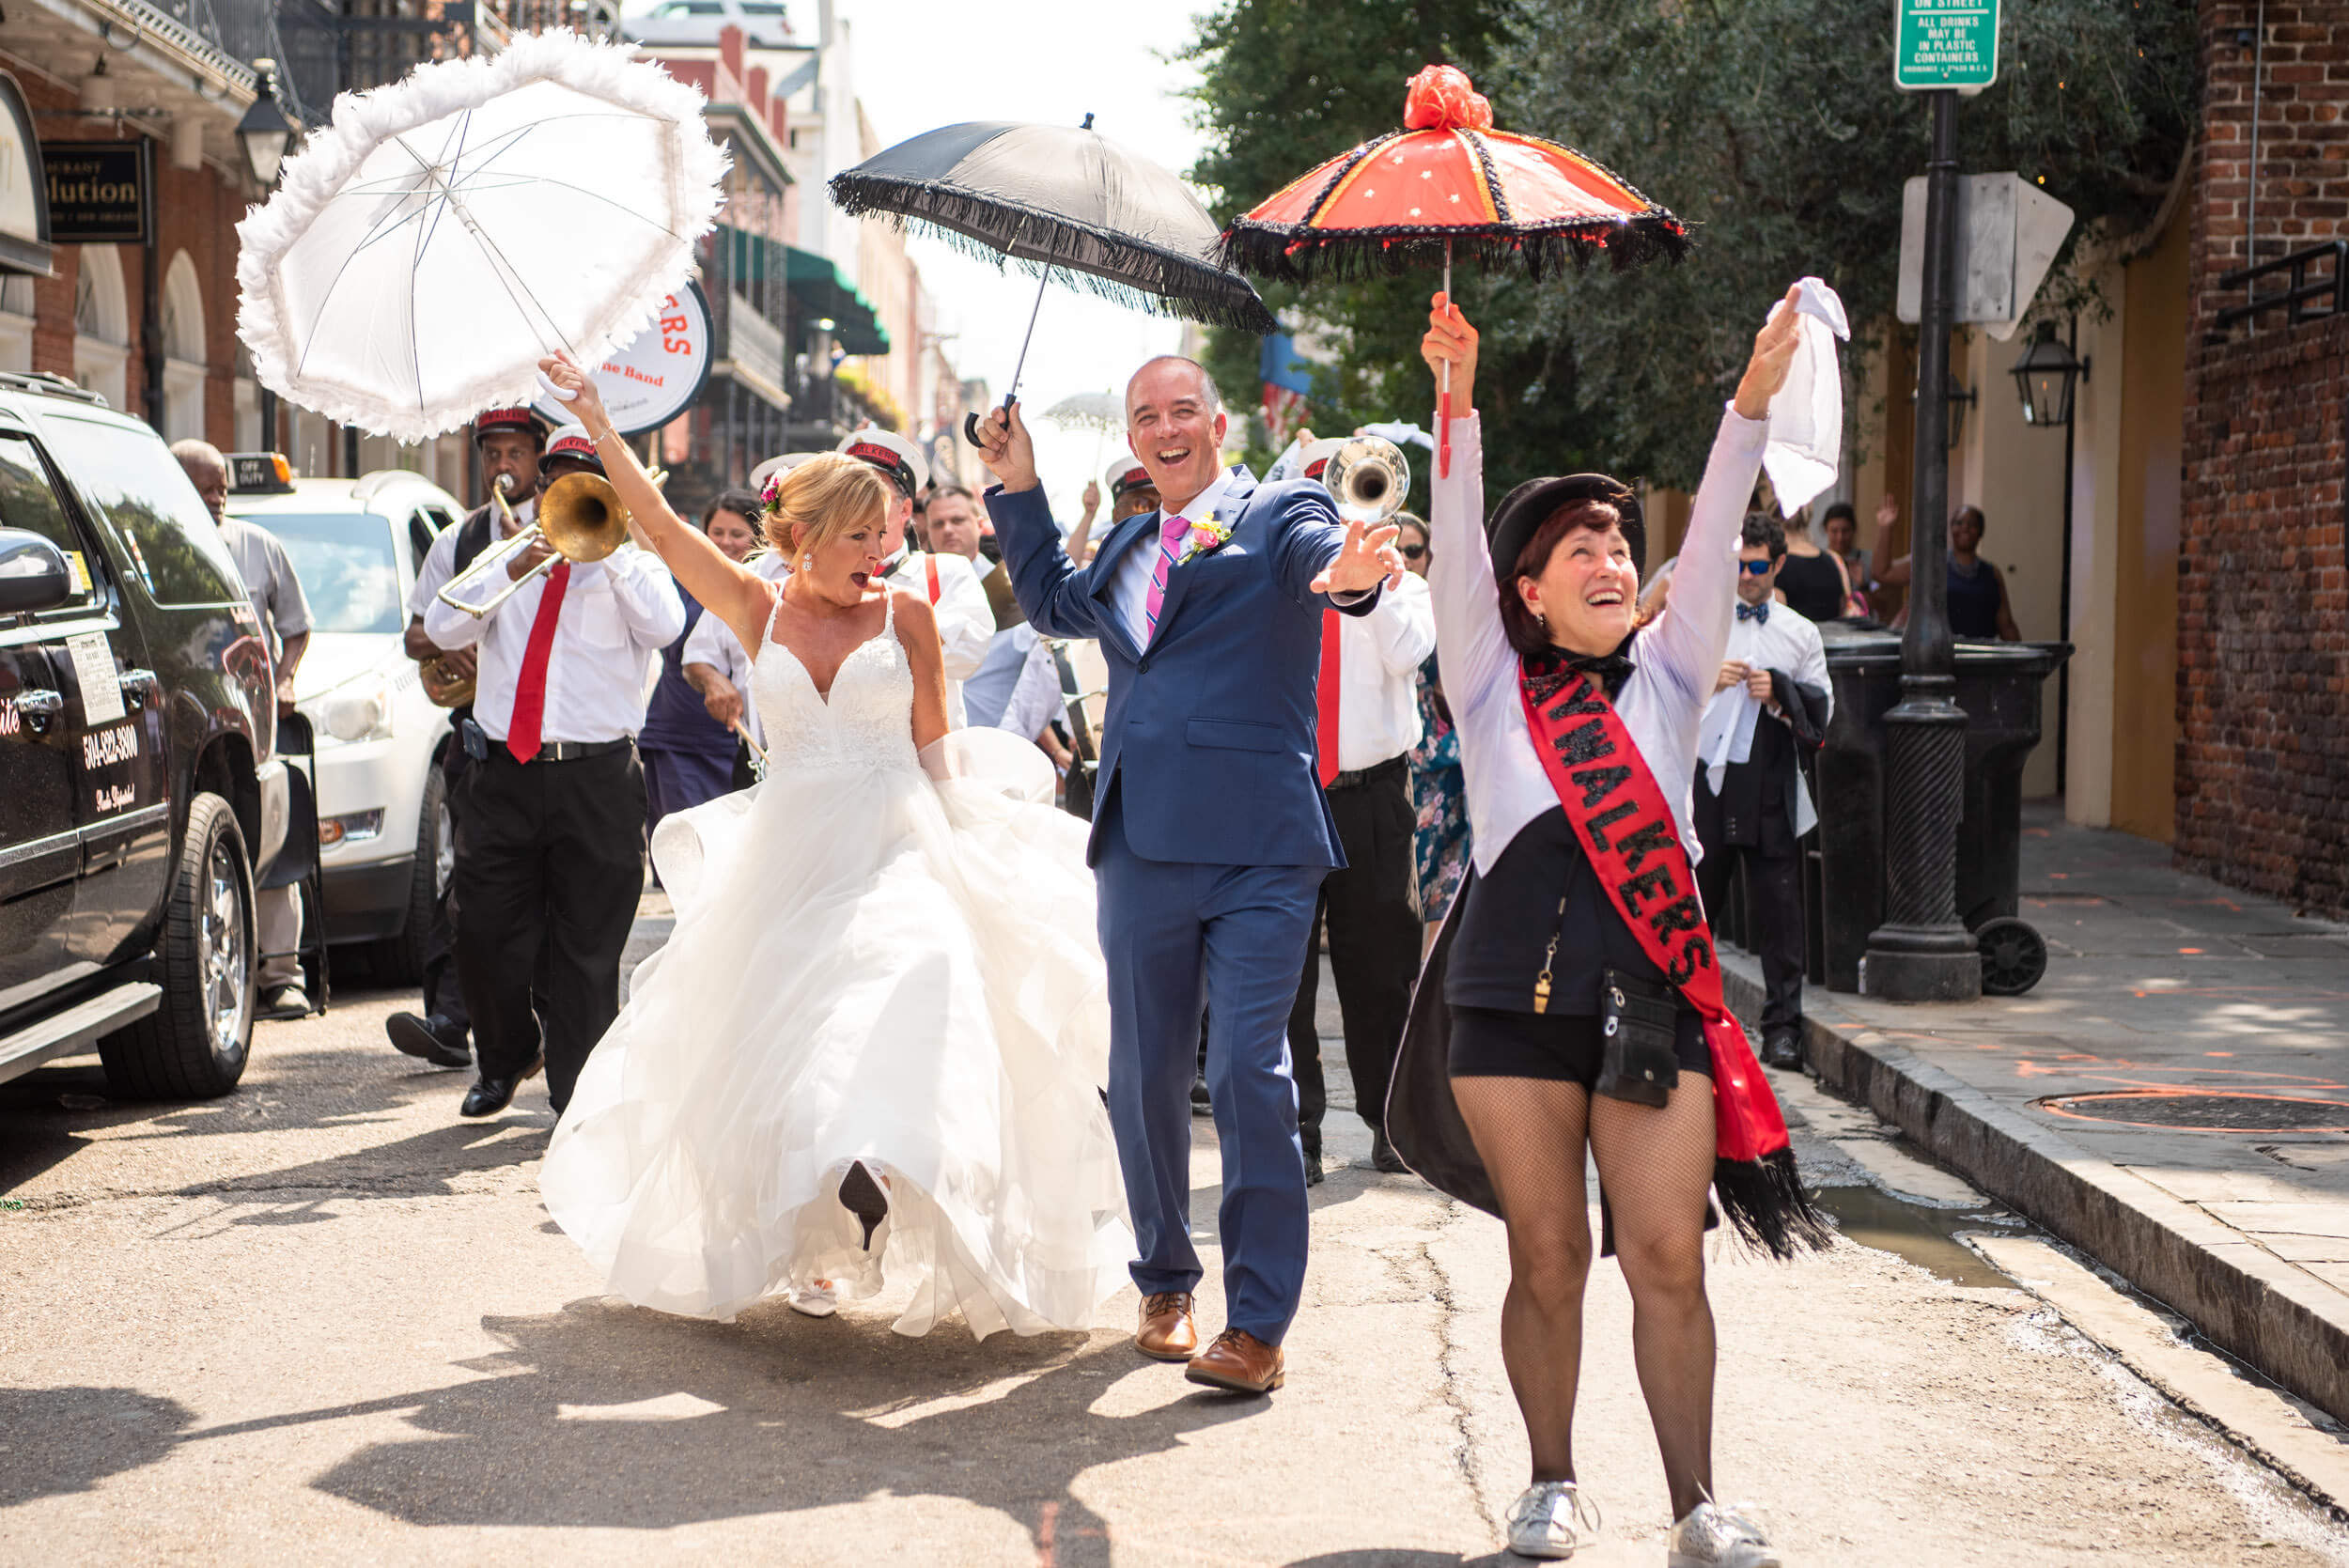 New Orleans wedding secondline parade featuring The Jaywalkers. Captured by New Orleans wedding photographers from The Red M Studio.